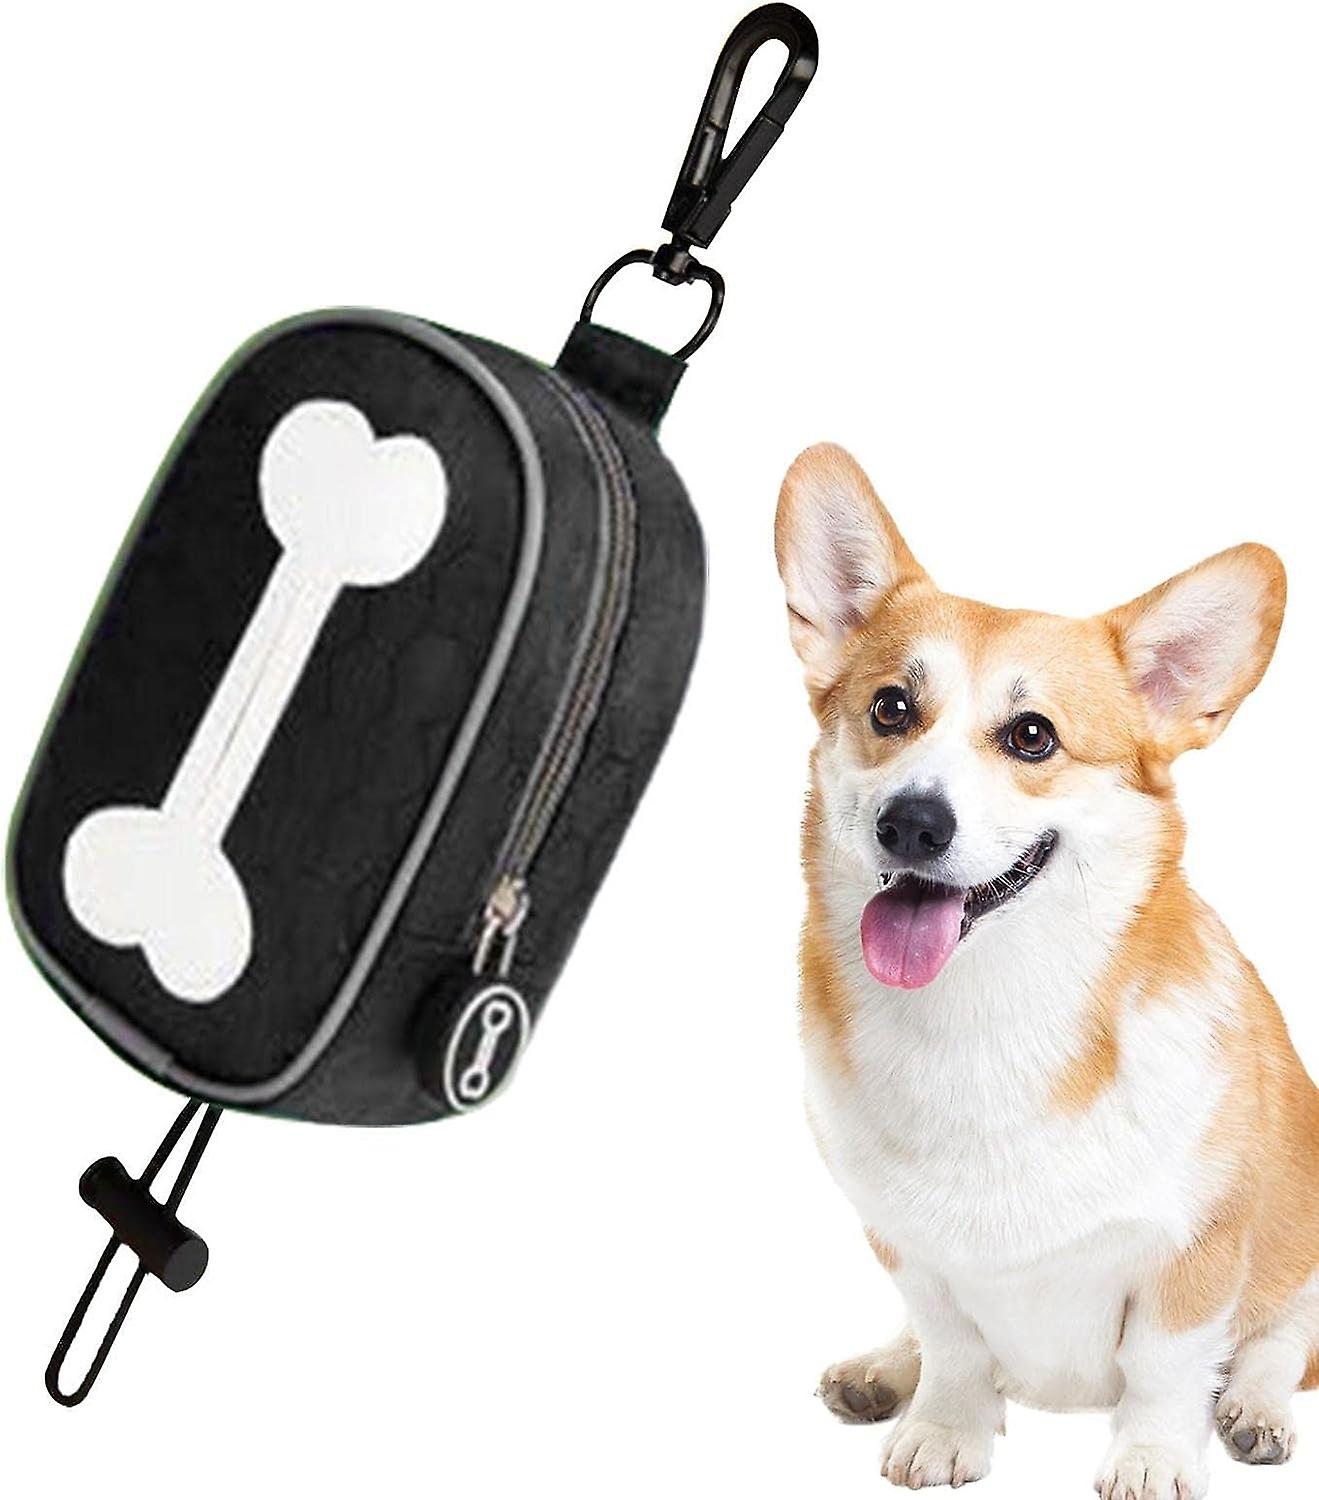 Bone Pattern Leash Poop Bag Holder， Reusable Leash Attachment Dispenser With Clip-on Pet Supplies For Travel， Walking， Park And Ulapithi.